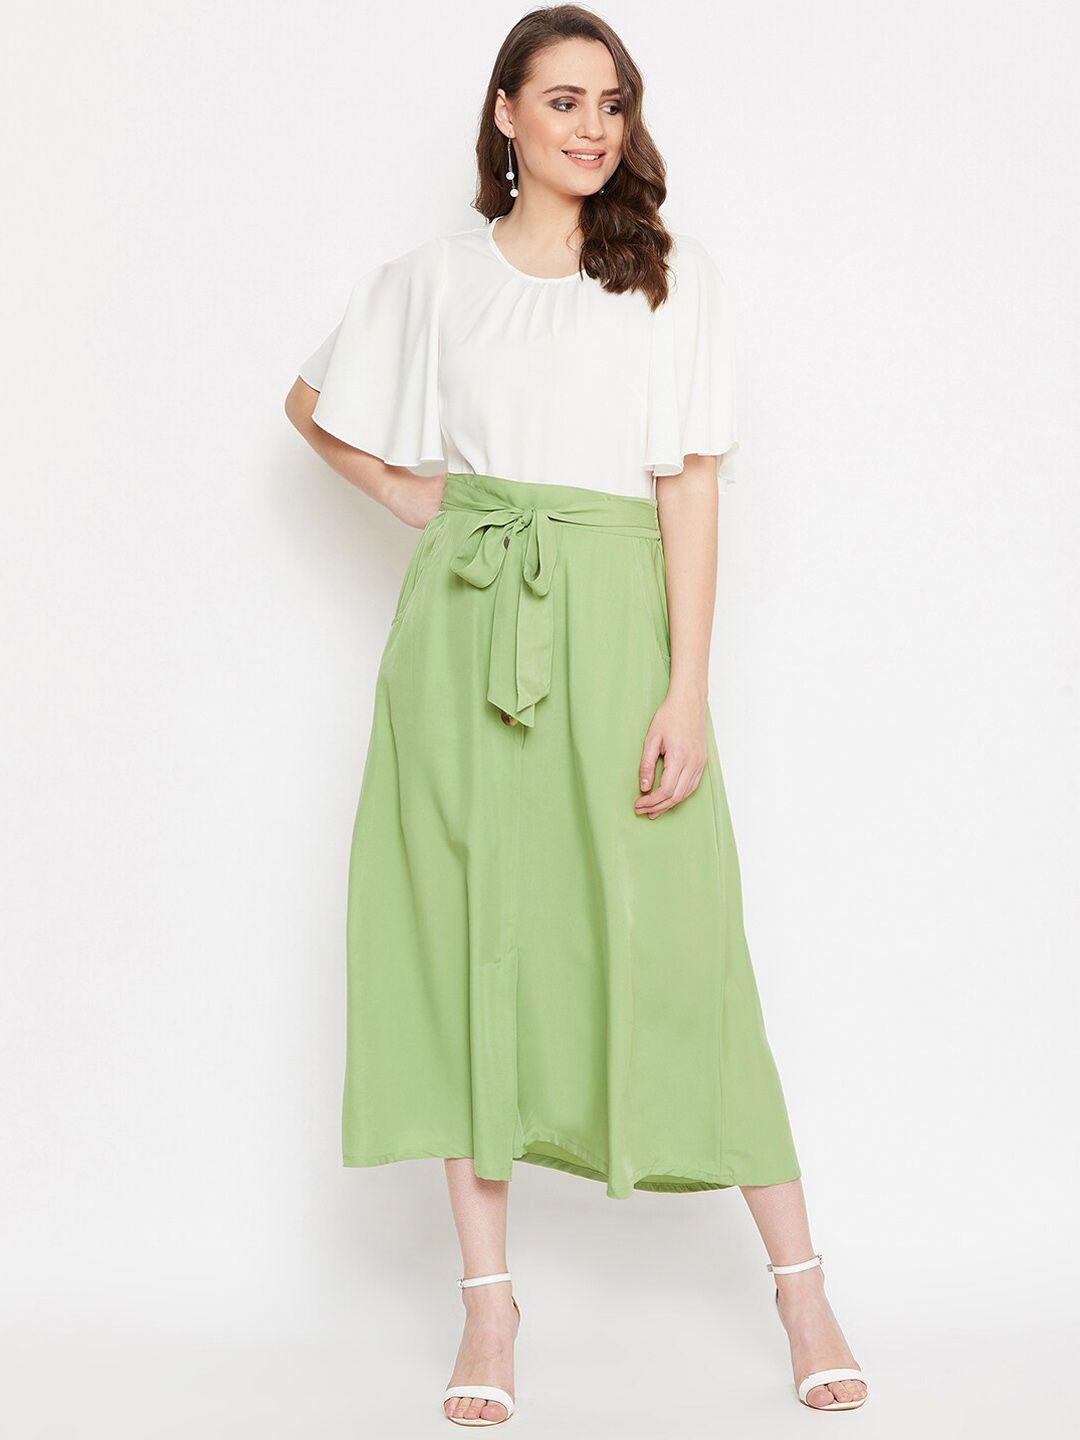 bitterlime women white & green solid top with skirt